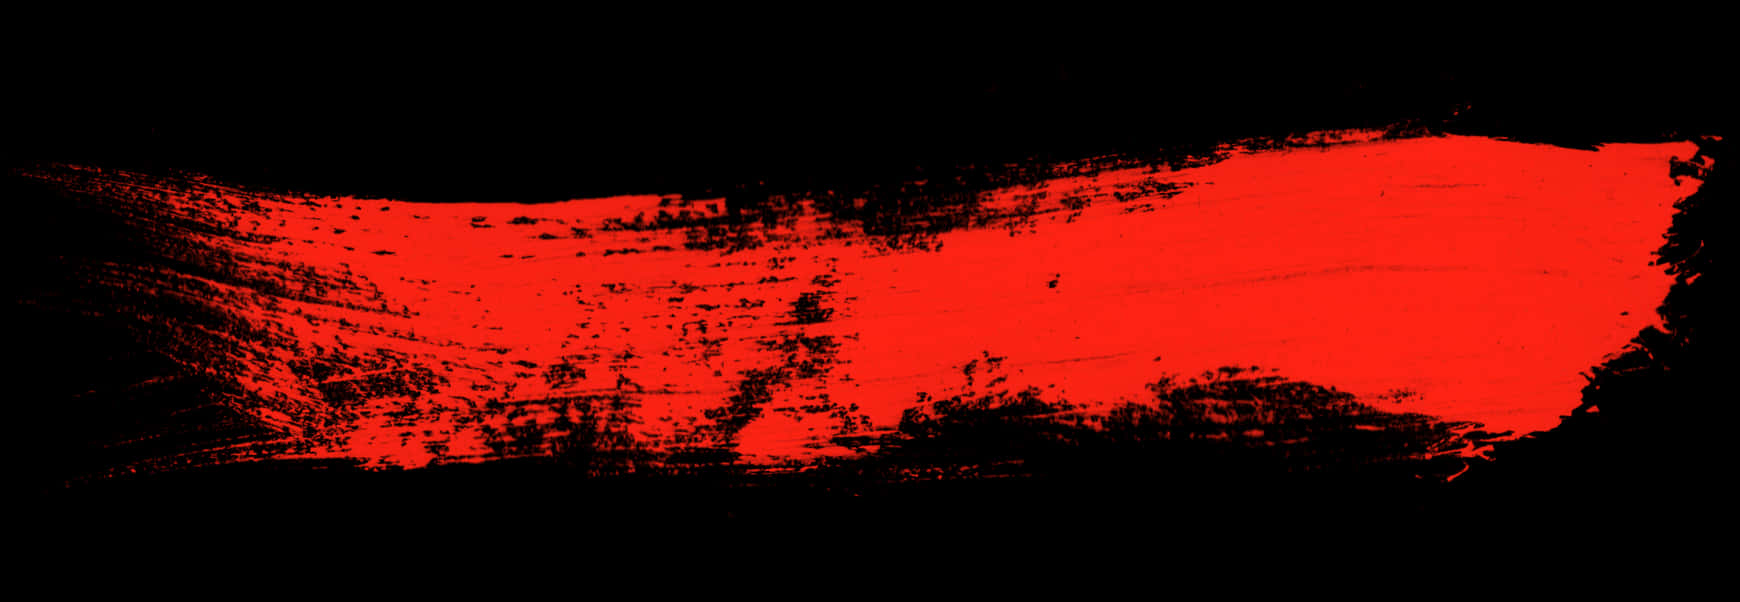 A Red And Black Brushstroke